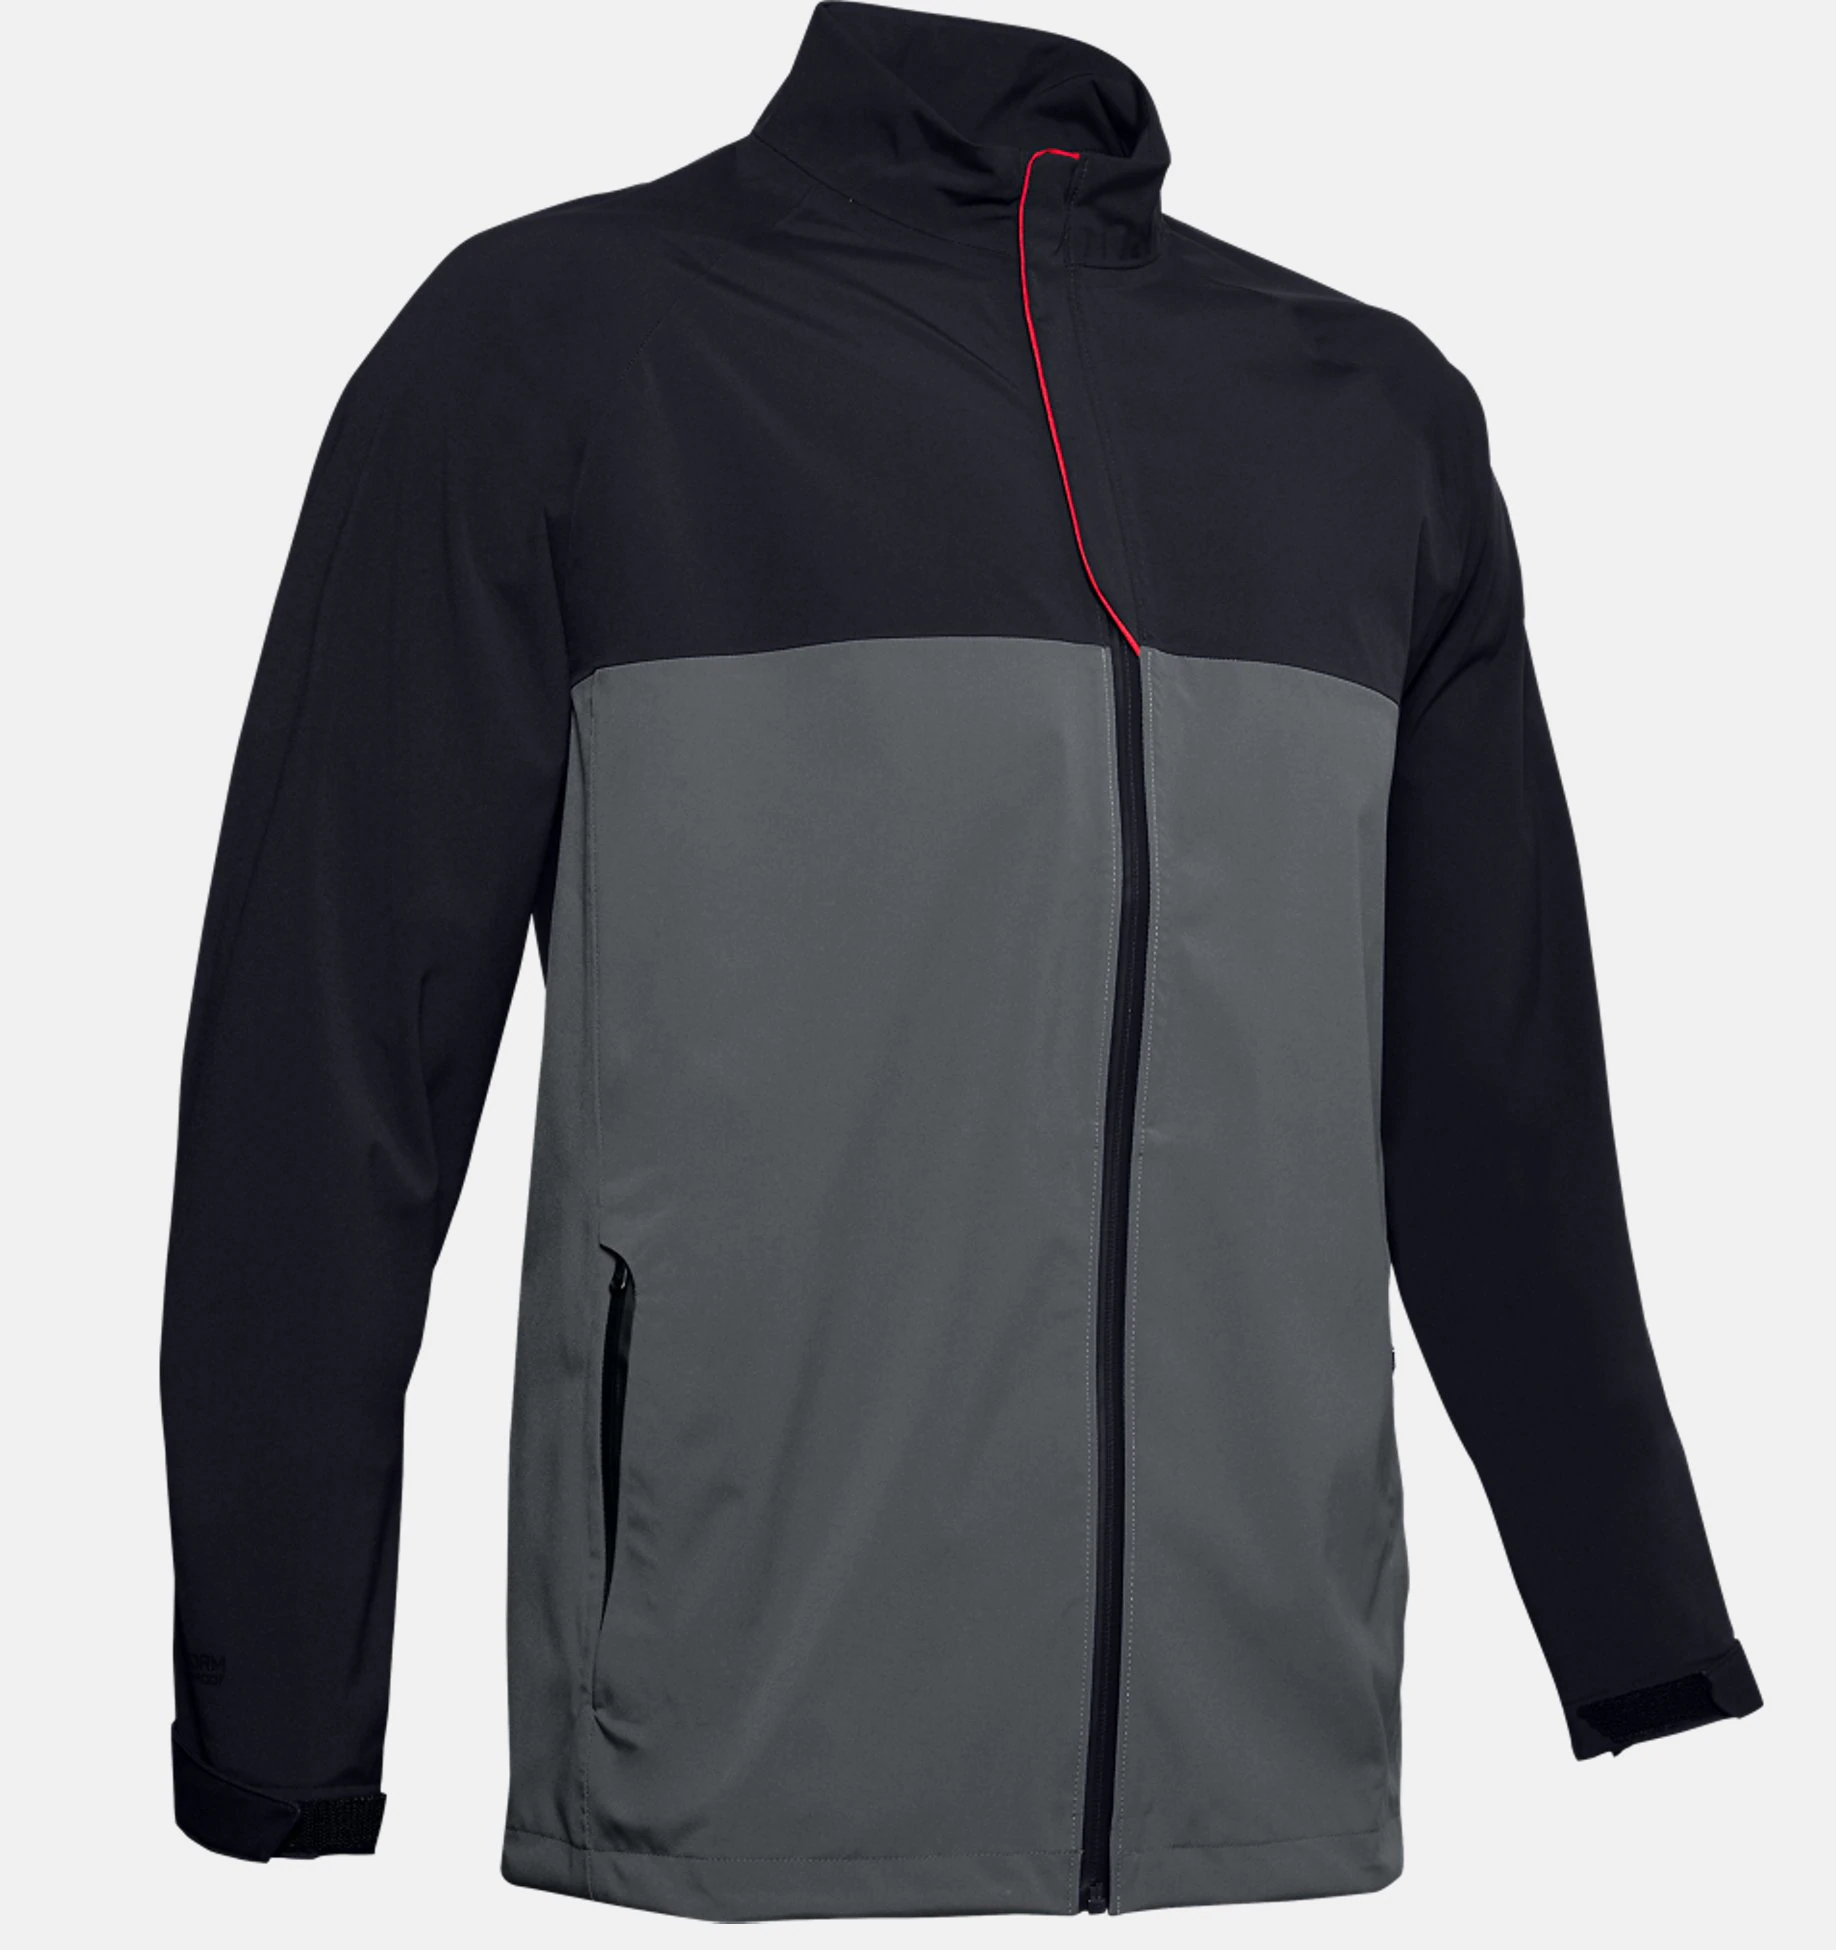 Under Armour Elements Rain Jacket in Black #1342717 category image